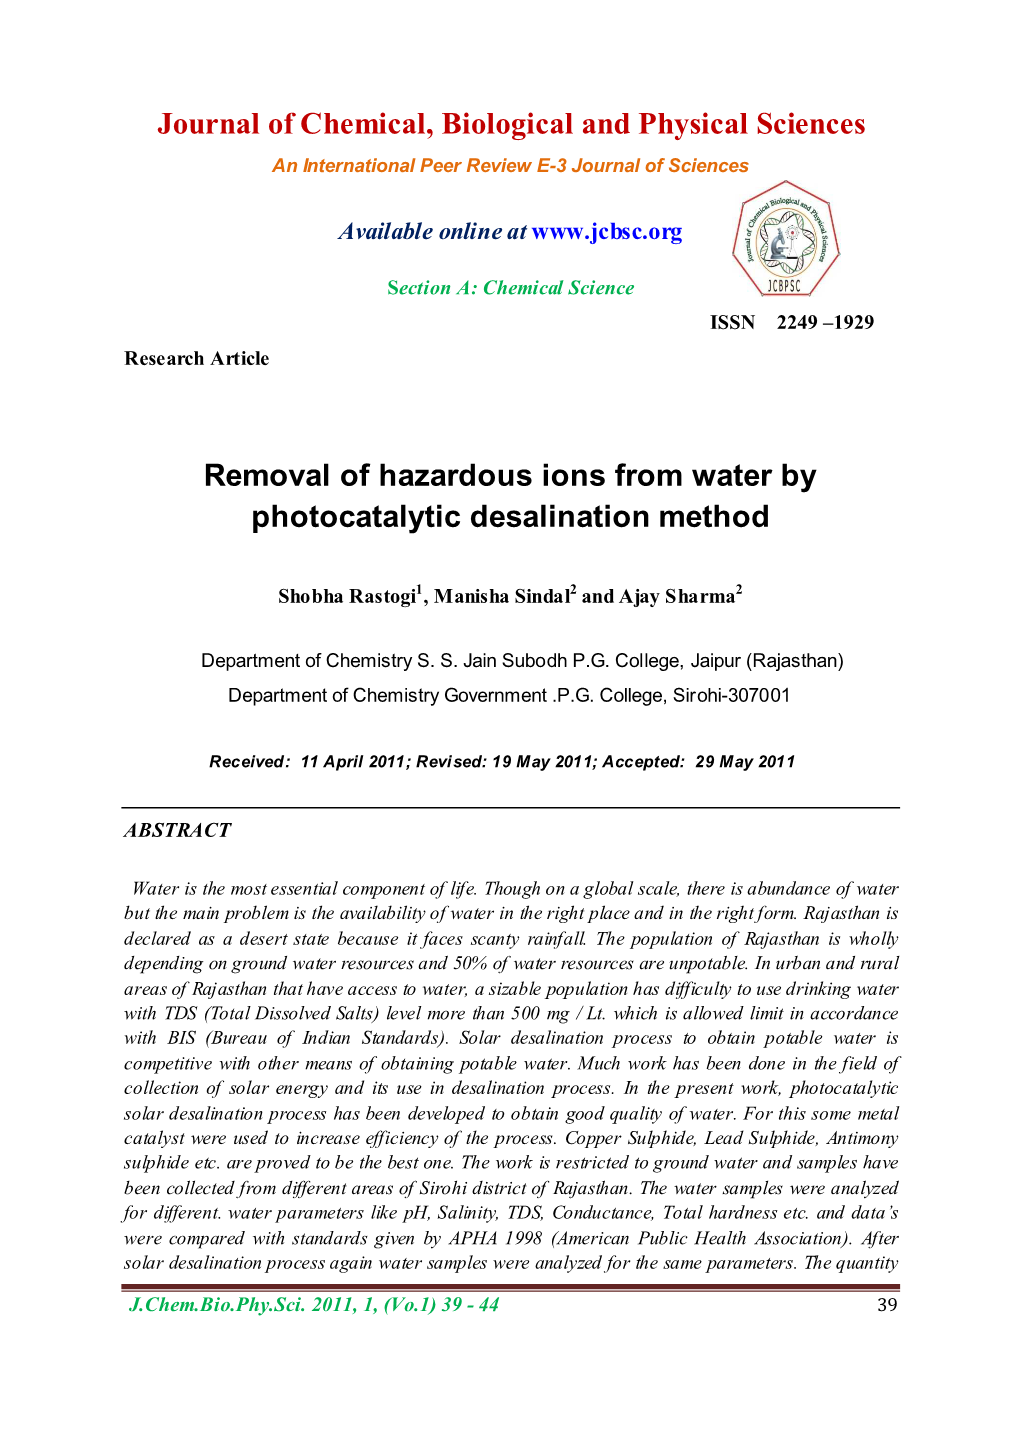 Removal of Hazardous Ions from Water by Photocatalytic Desalination Method